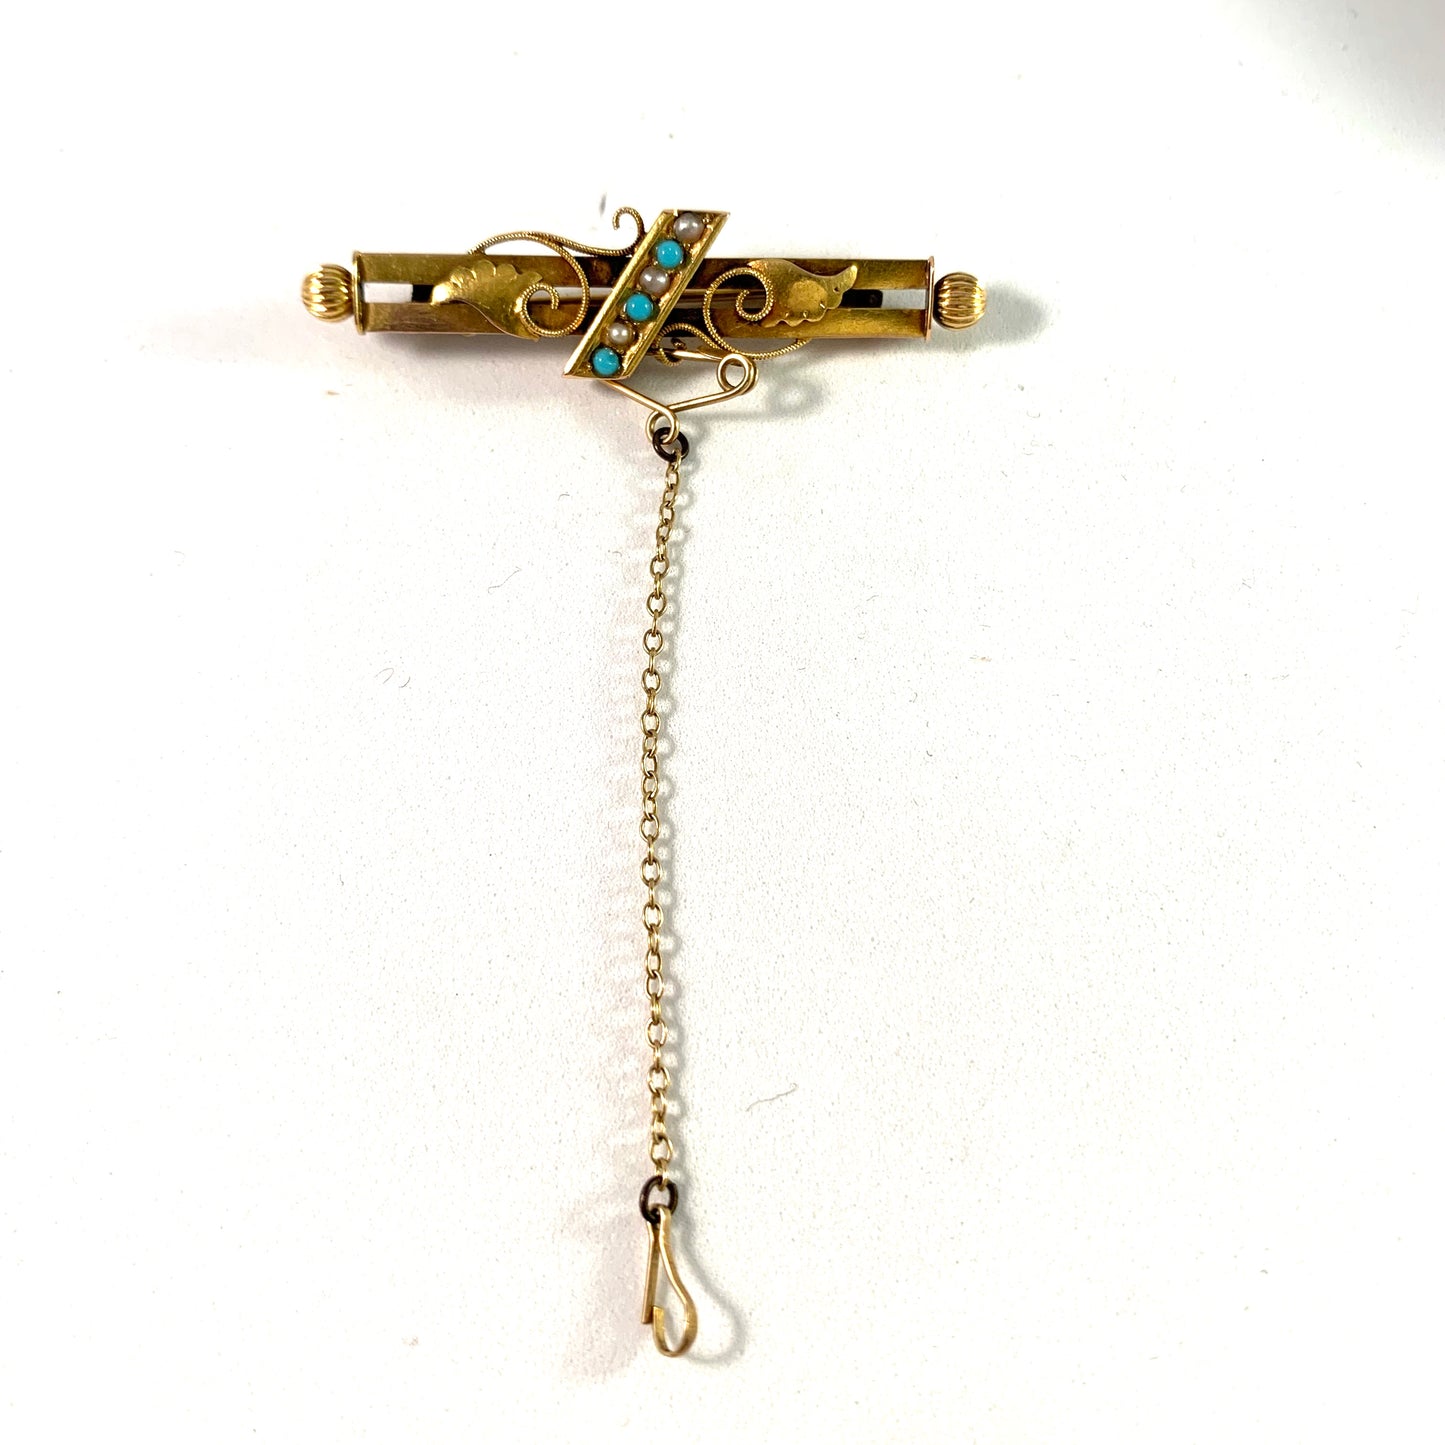 Chester Victorian 15k Gold Brooch with Turquoise and Pearls.